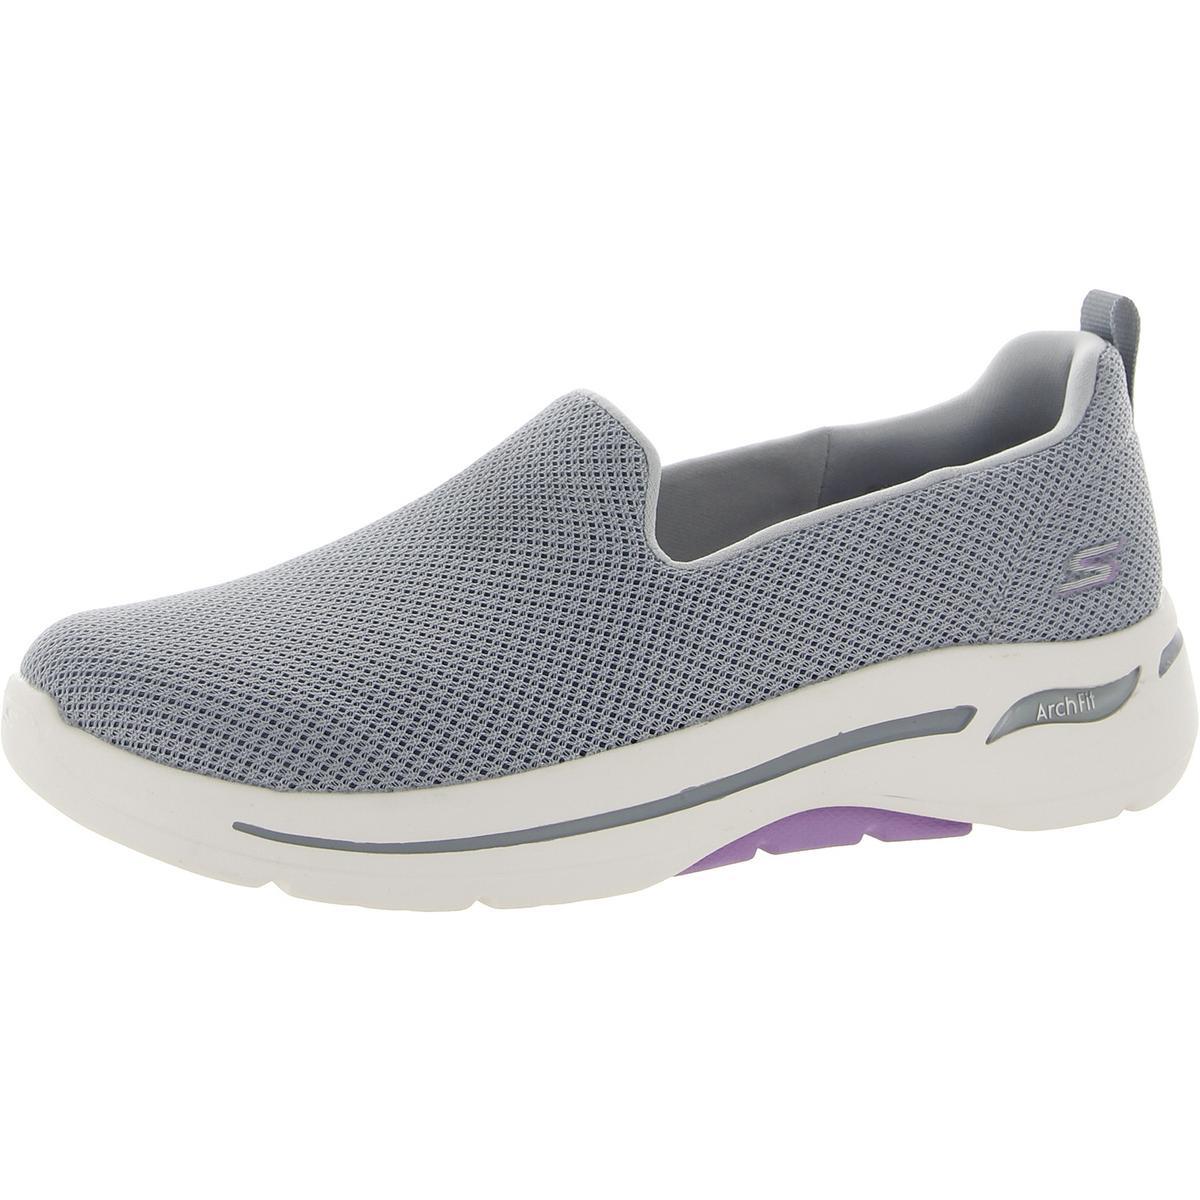 Skechers Womens Go Walk Arch Fit-grateful Slip-on Sneakers Shoes Bhfo 6237 Gray/Lavender